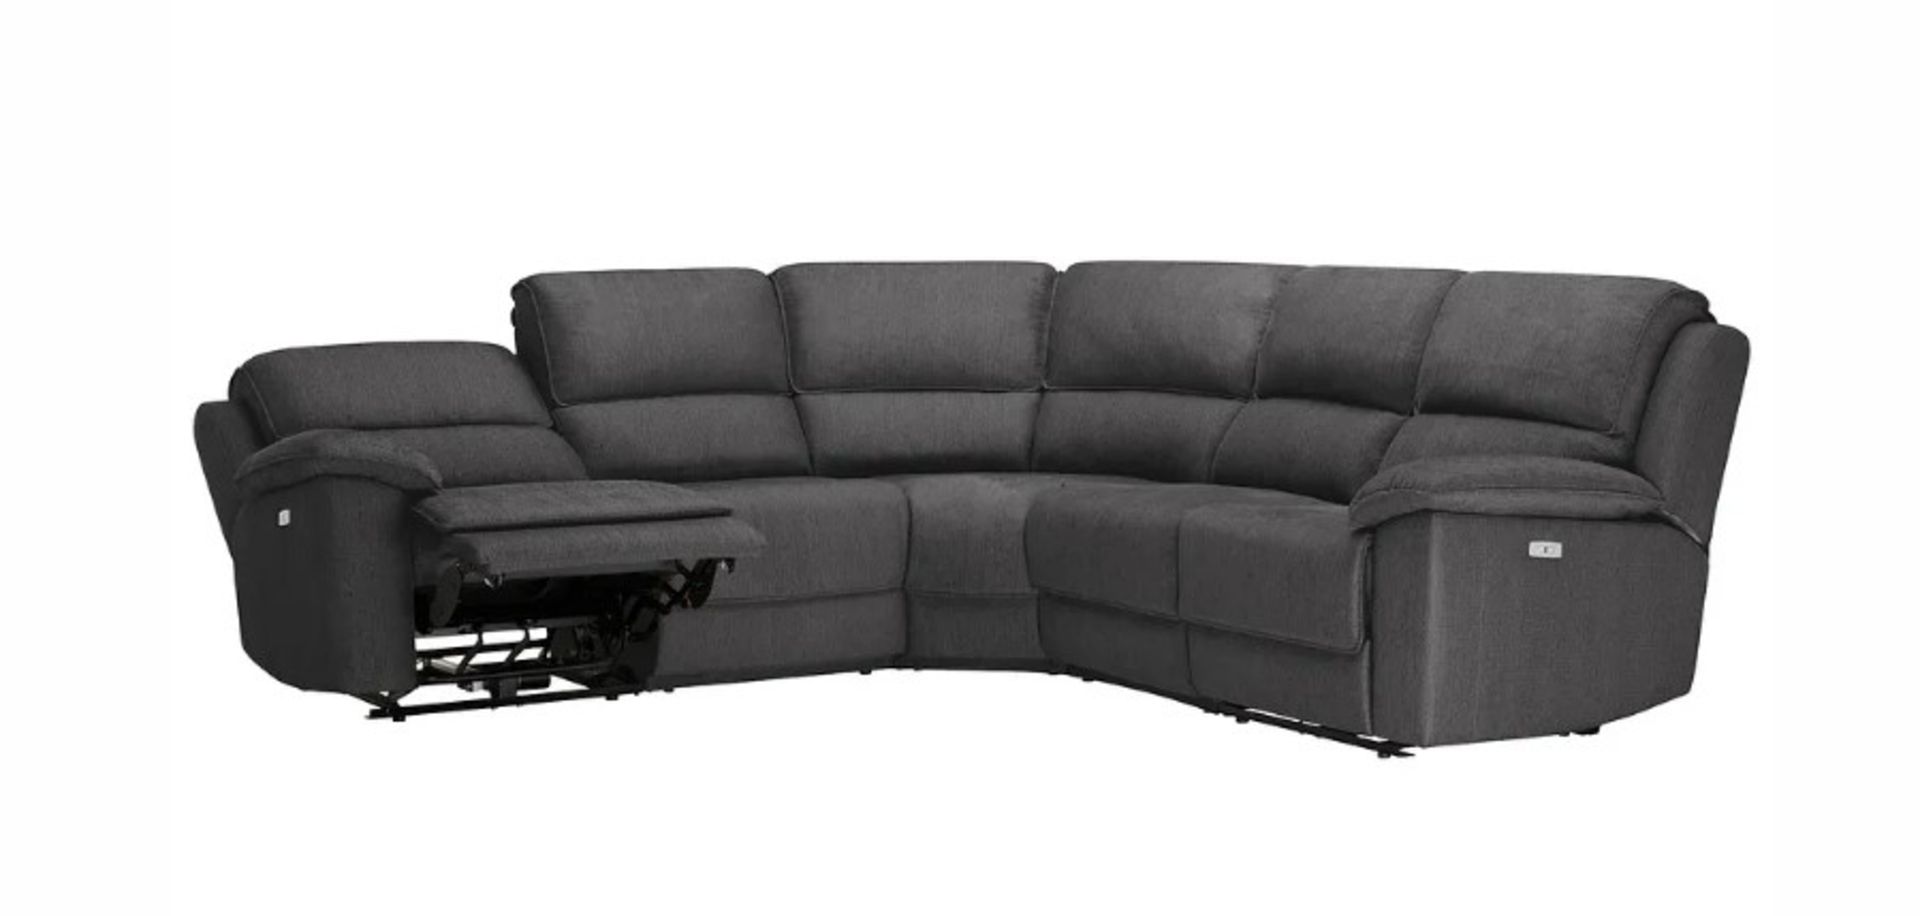 GOODWOOD 6 Seat Corner Recliner Sofa | Plush Charcoal Fabric. RRP £2,549. (ROW7-6BOXES) The Goodwood - Image 4 of 9